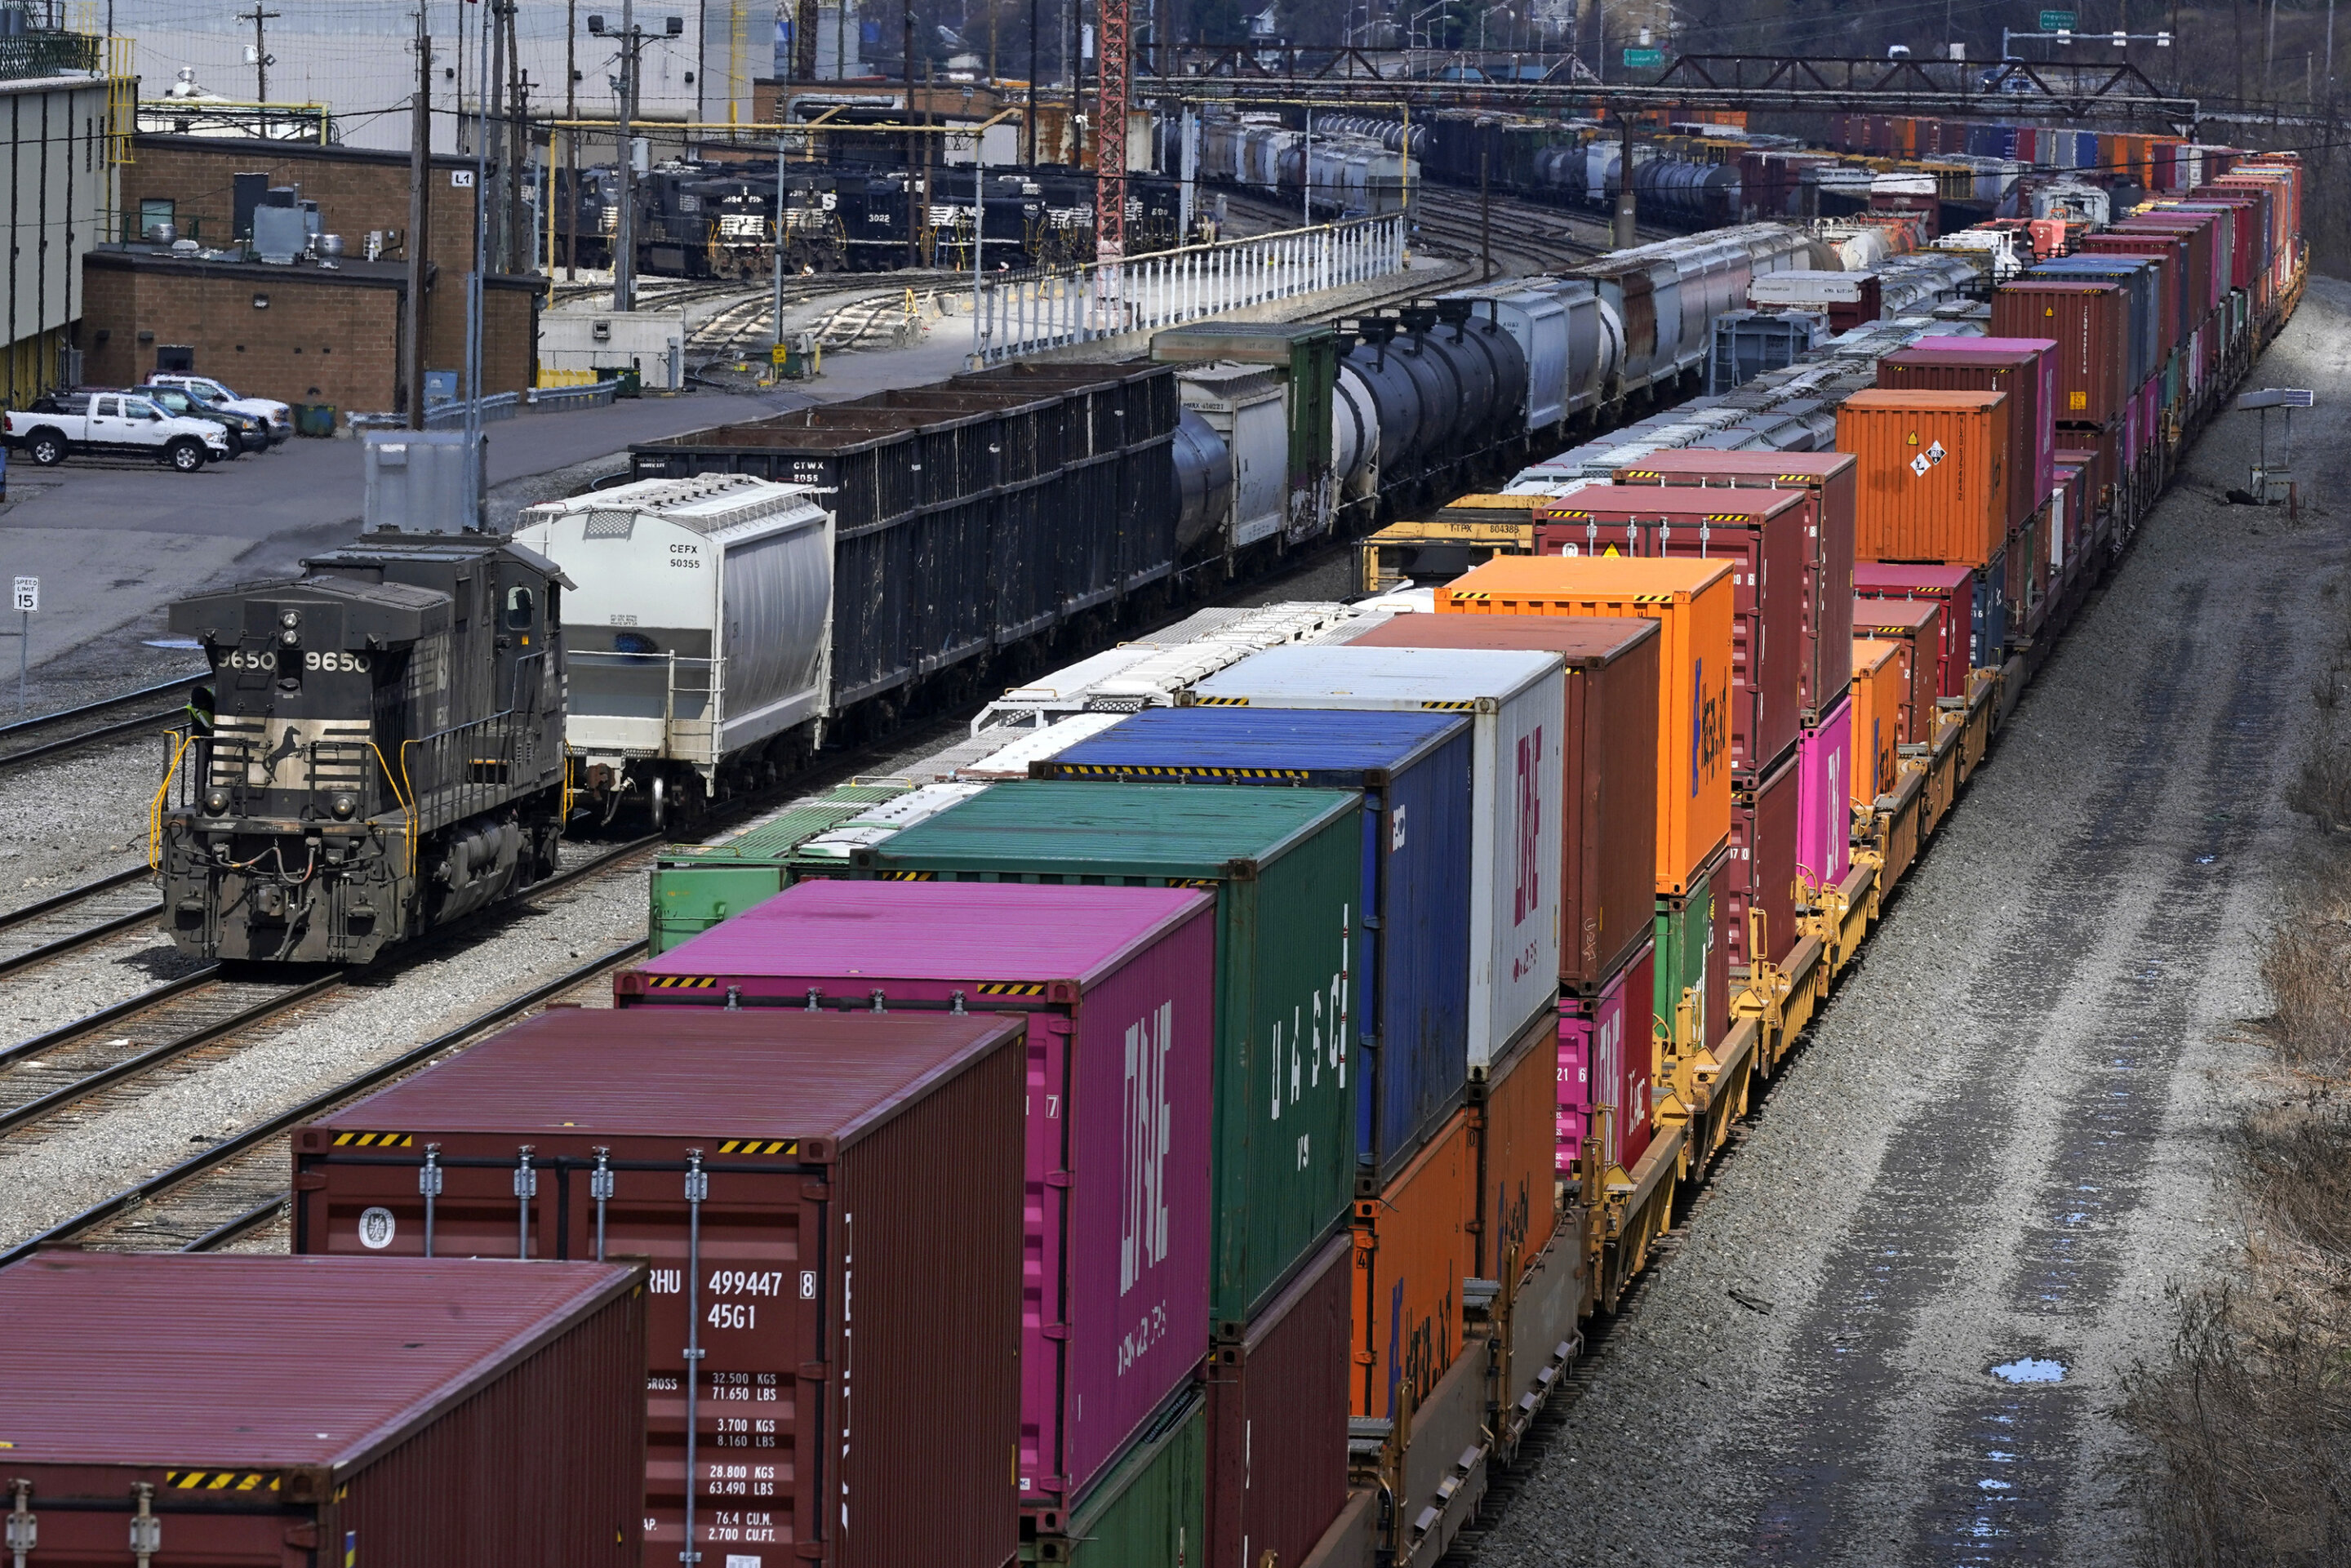 #Consumers could pay price if railroads, unions can’t agree